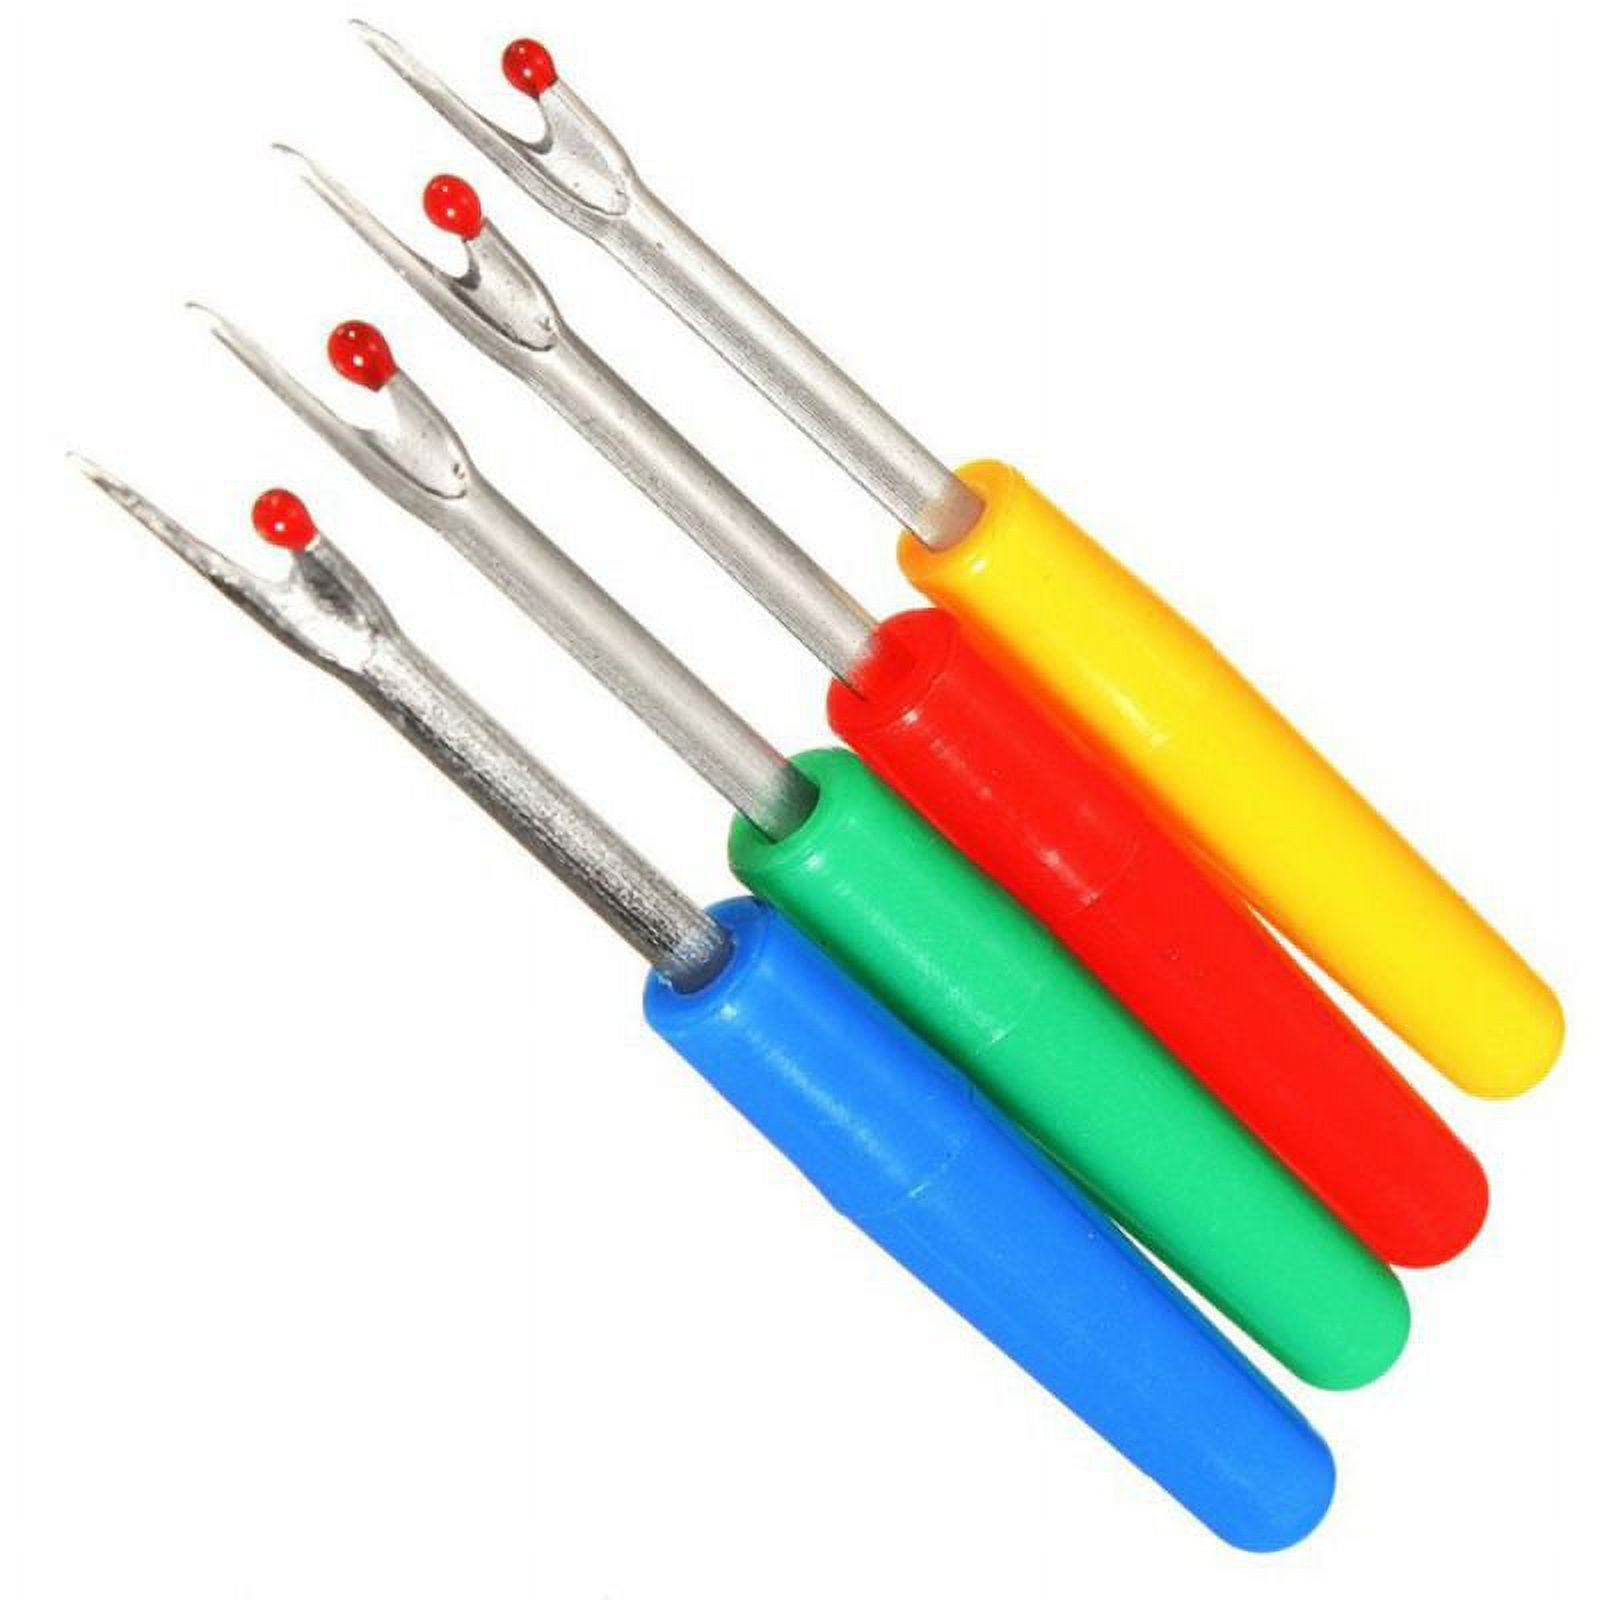 KAOBUY 8 Pcs Sewing Seam Ripper And Thread Remover Kit,Colorful